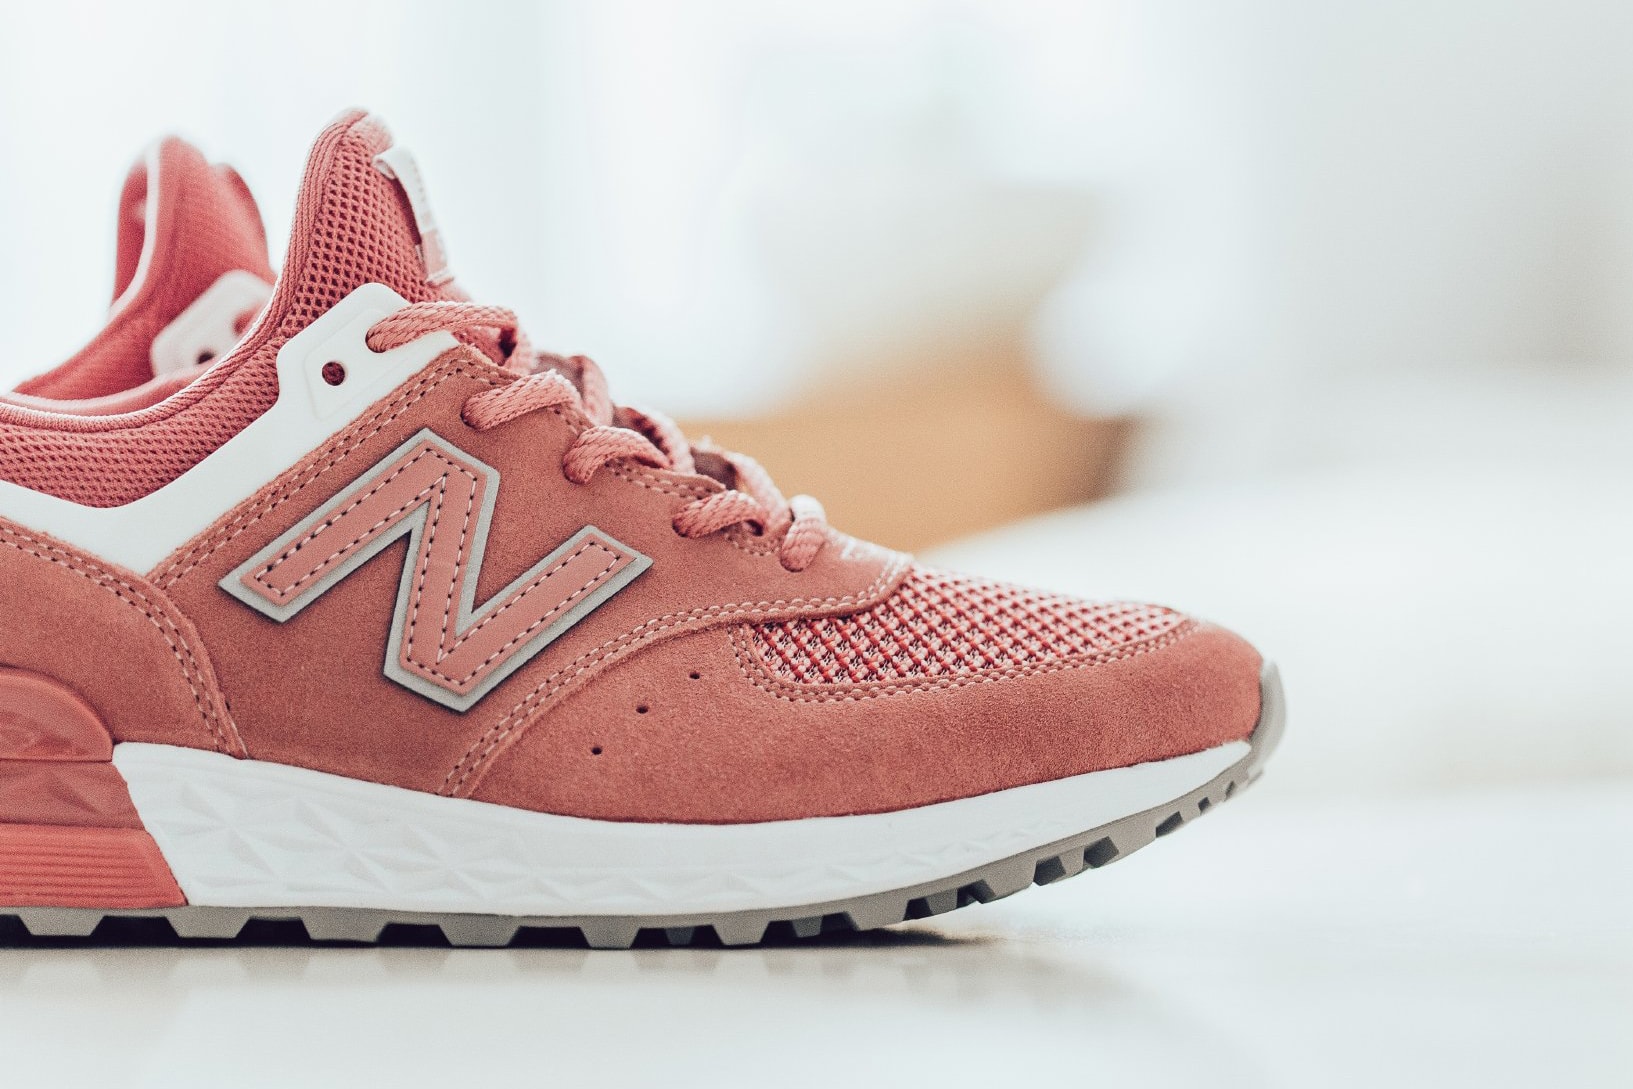 New Balance 574 Sports Dusted Peach Pink Rose Sneaker Close Up